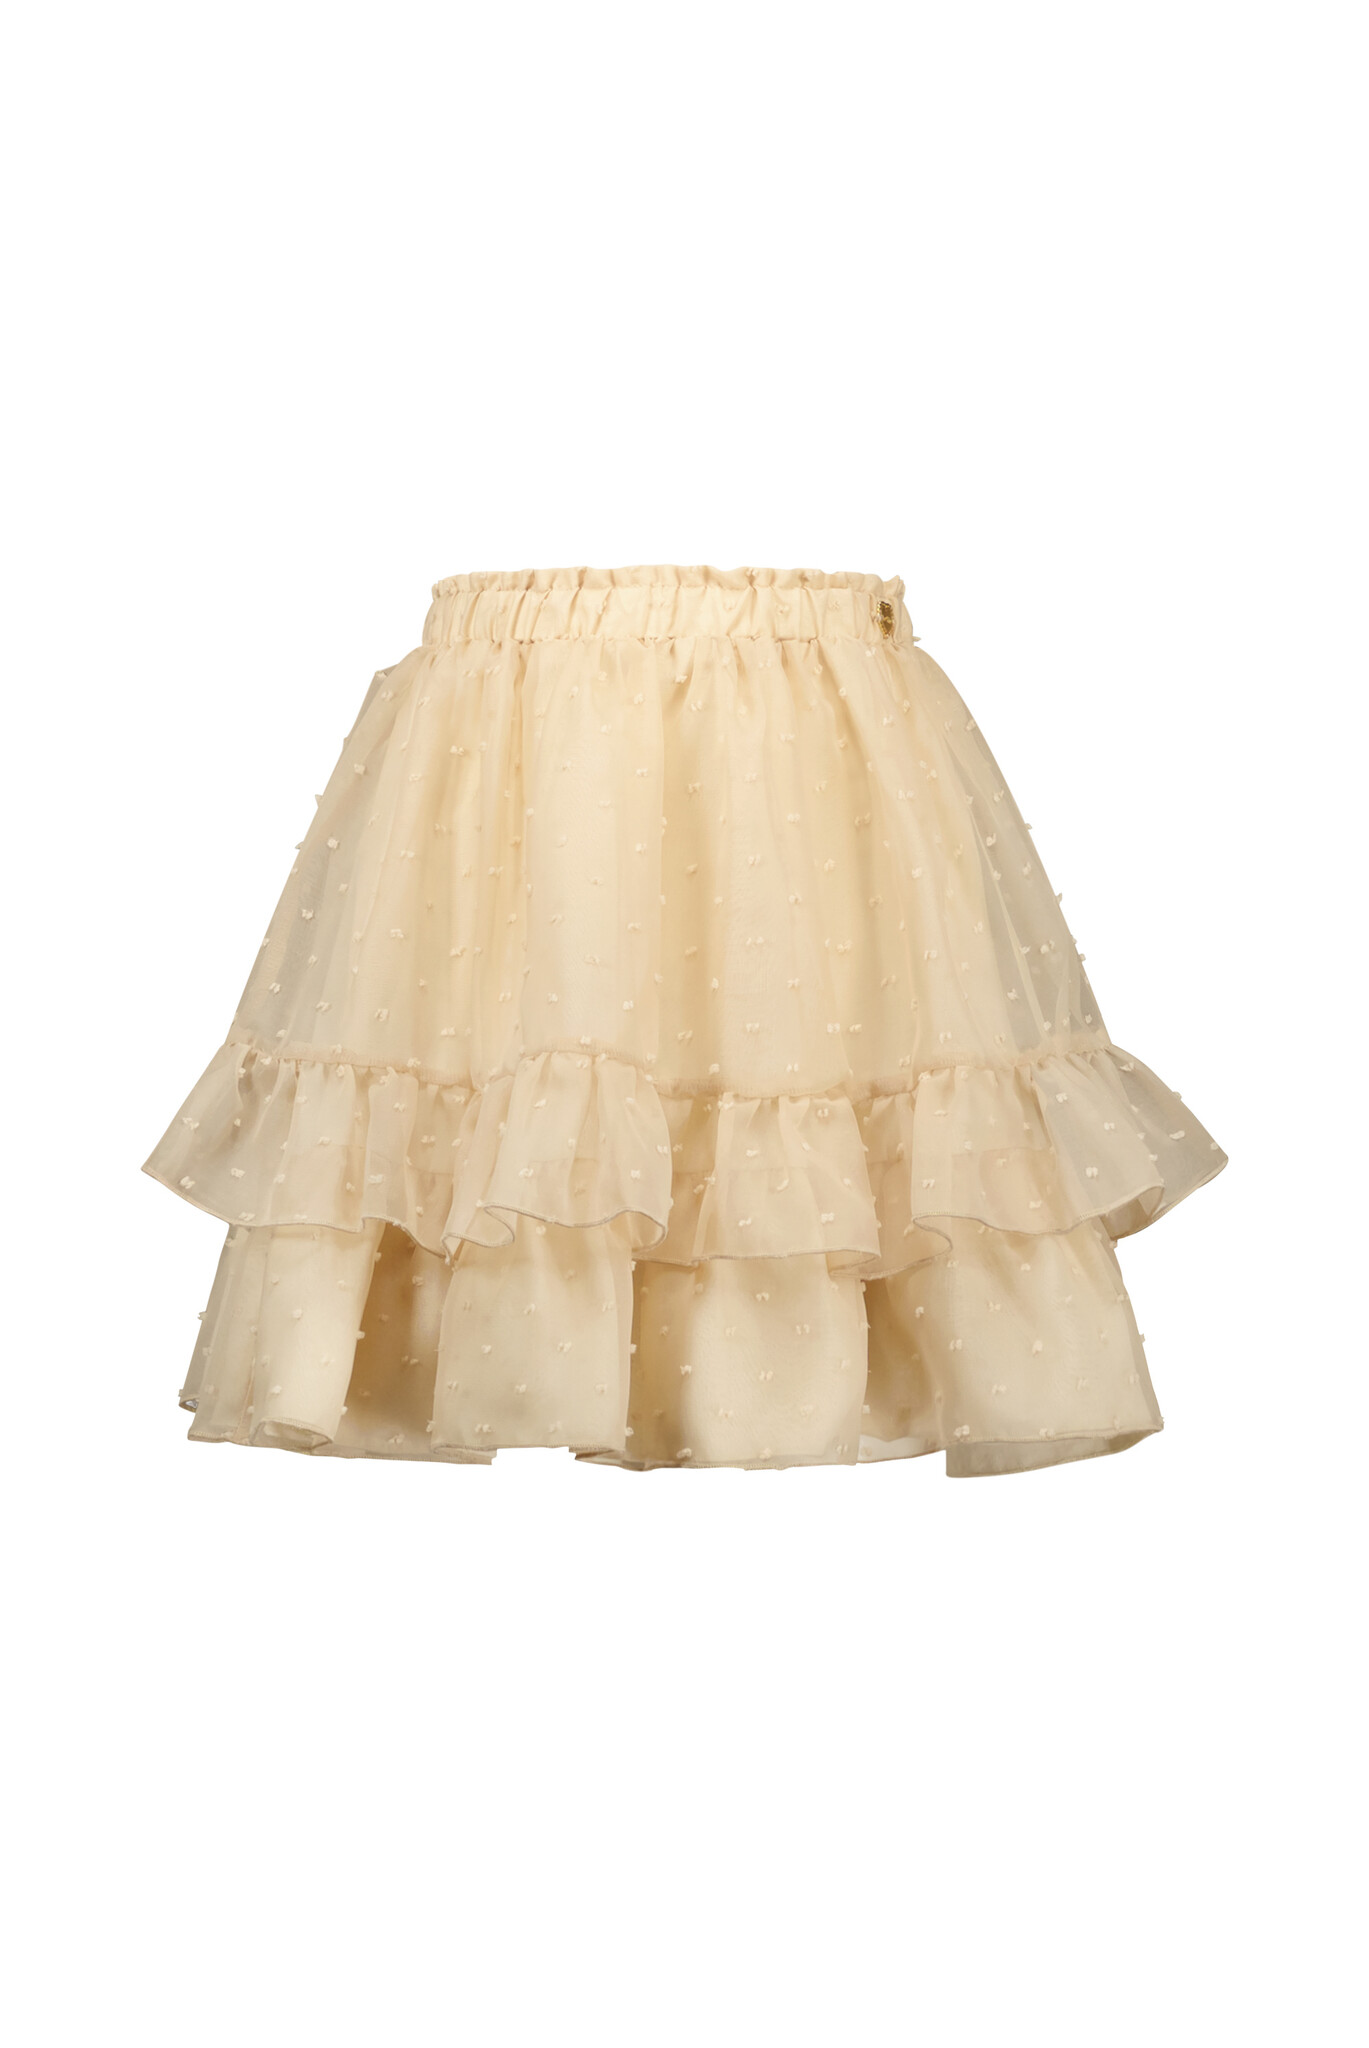 Le Chic C308-5733 Meisjes Rok - Pearled Ivory - Maat 116